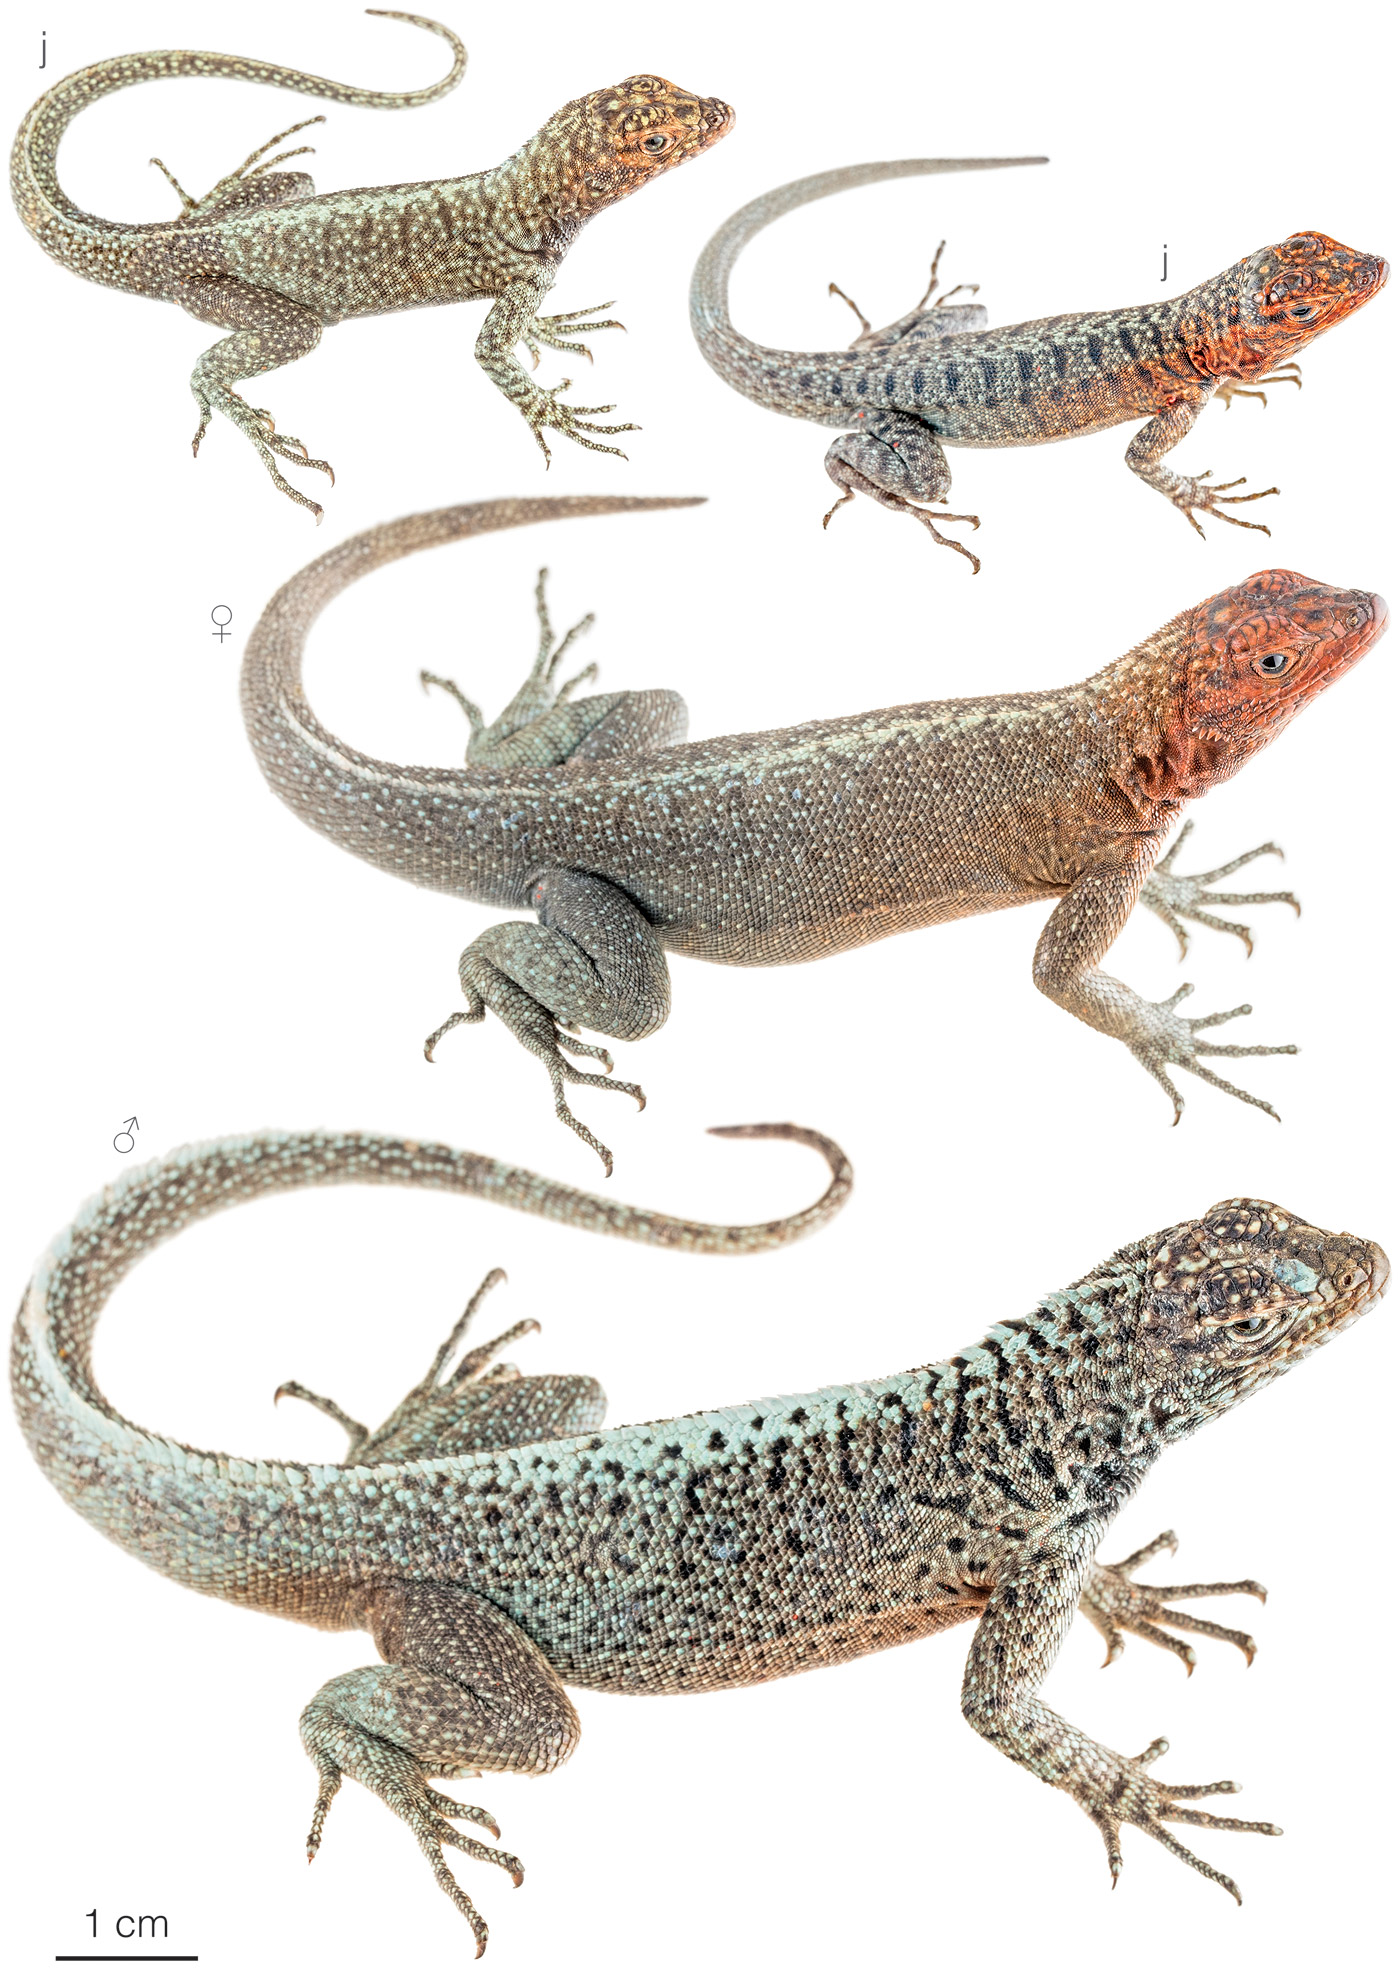 Figure showing variation among individuals of Microlophus pacificus